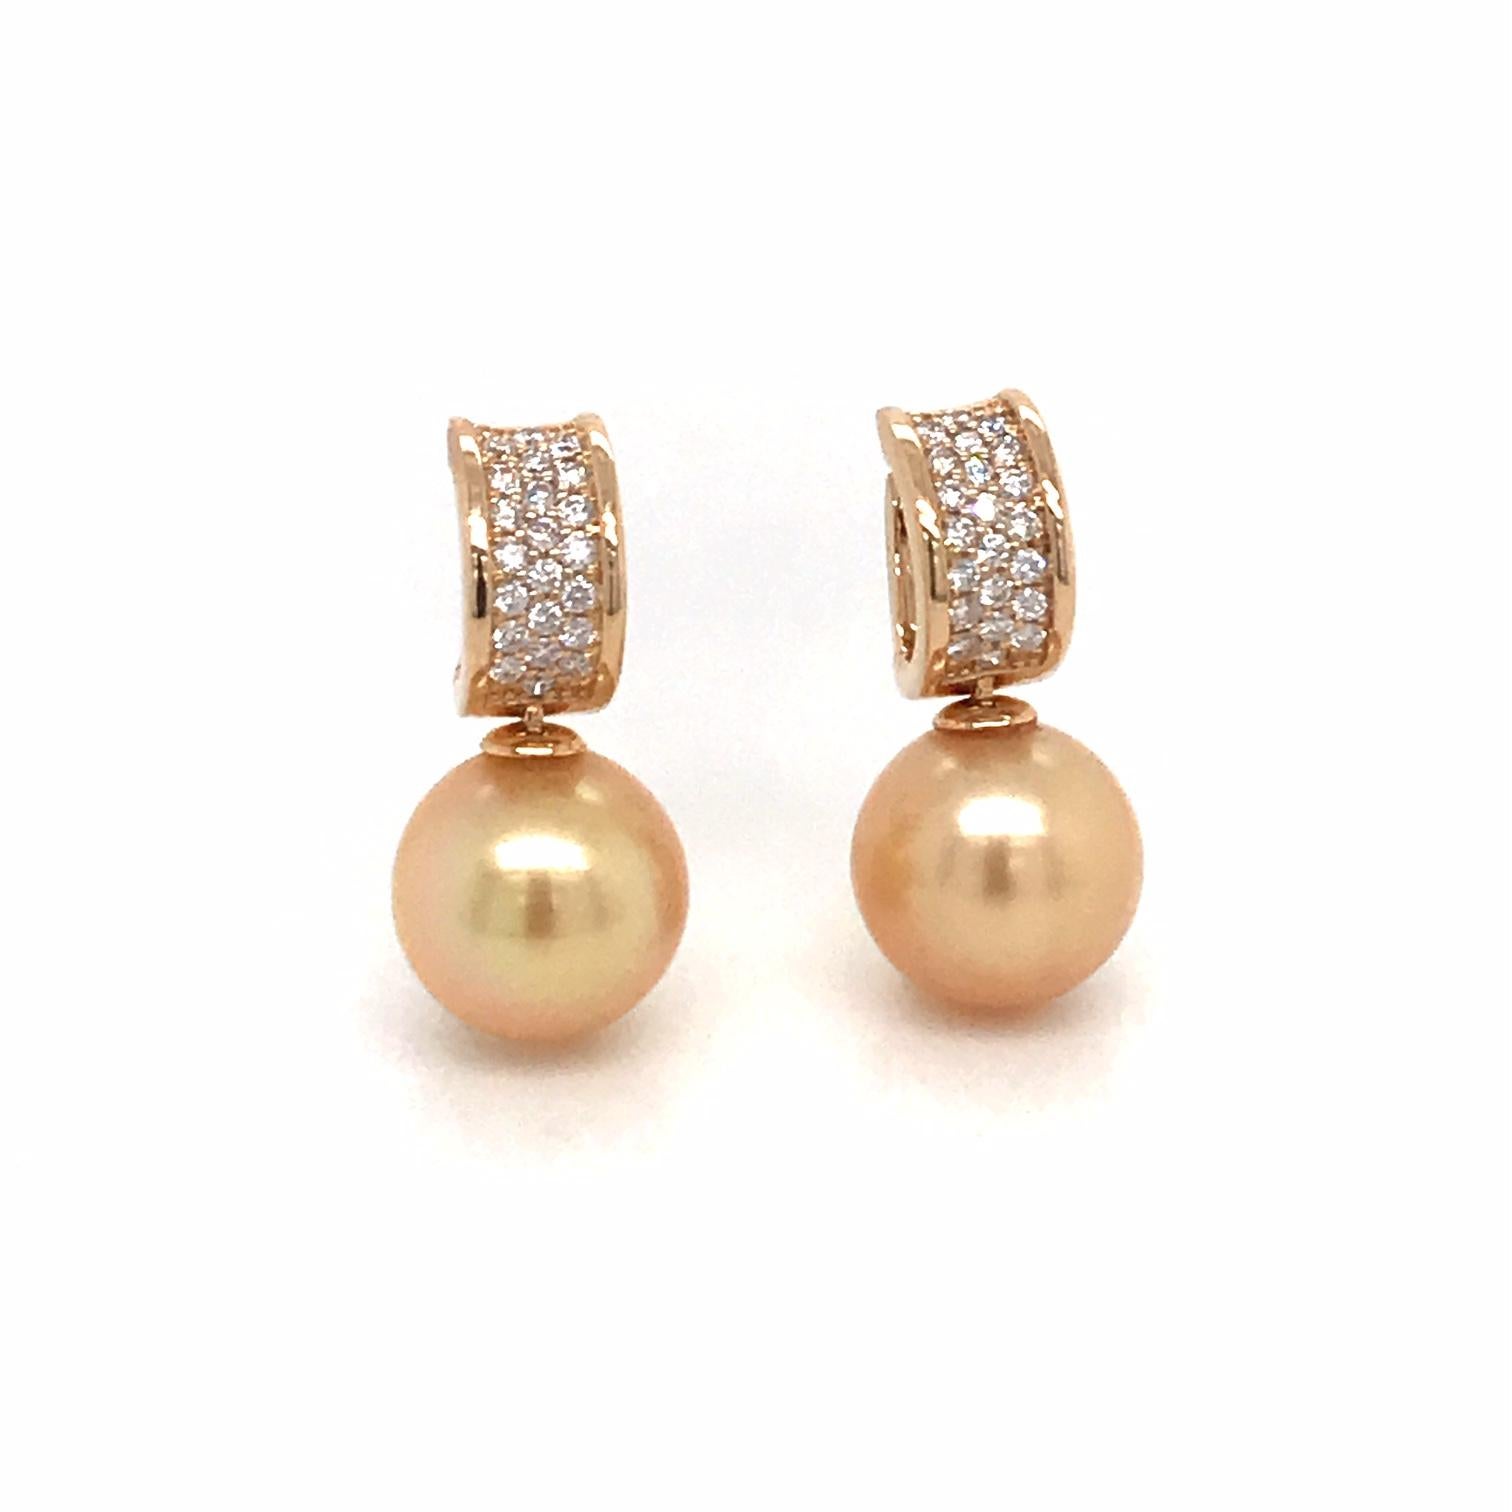 18K Yellow gold drop earrings featuring two Golden South Sea Pearls measuring 11-12 mm with 44 round brilliants weighing 0.43 carats.
Color G-H
Clarity SI

Pearl can be changed to a Pink, White or Tahitian Pearl upon request. Price subject to